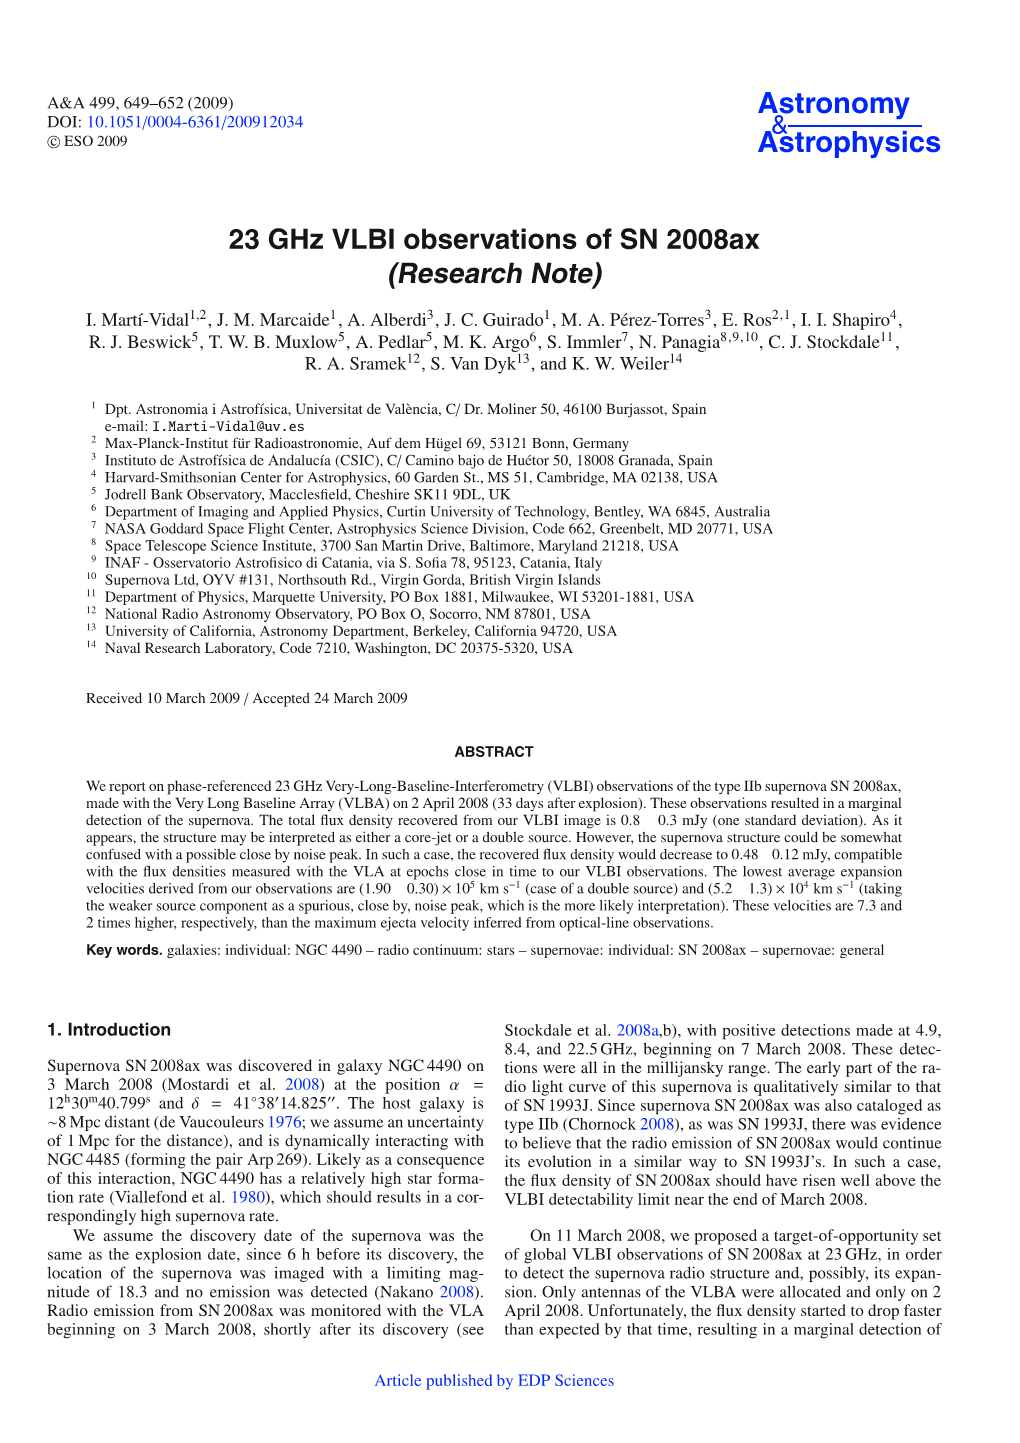 23 Ghz VLBI Observations of SN 2008Ax (Research Note)